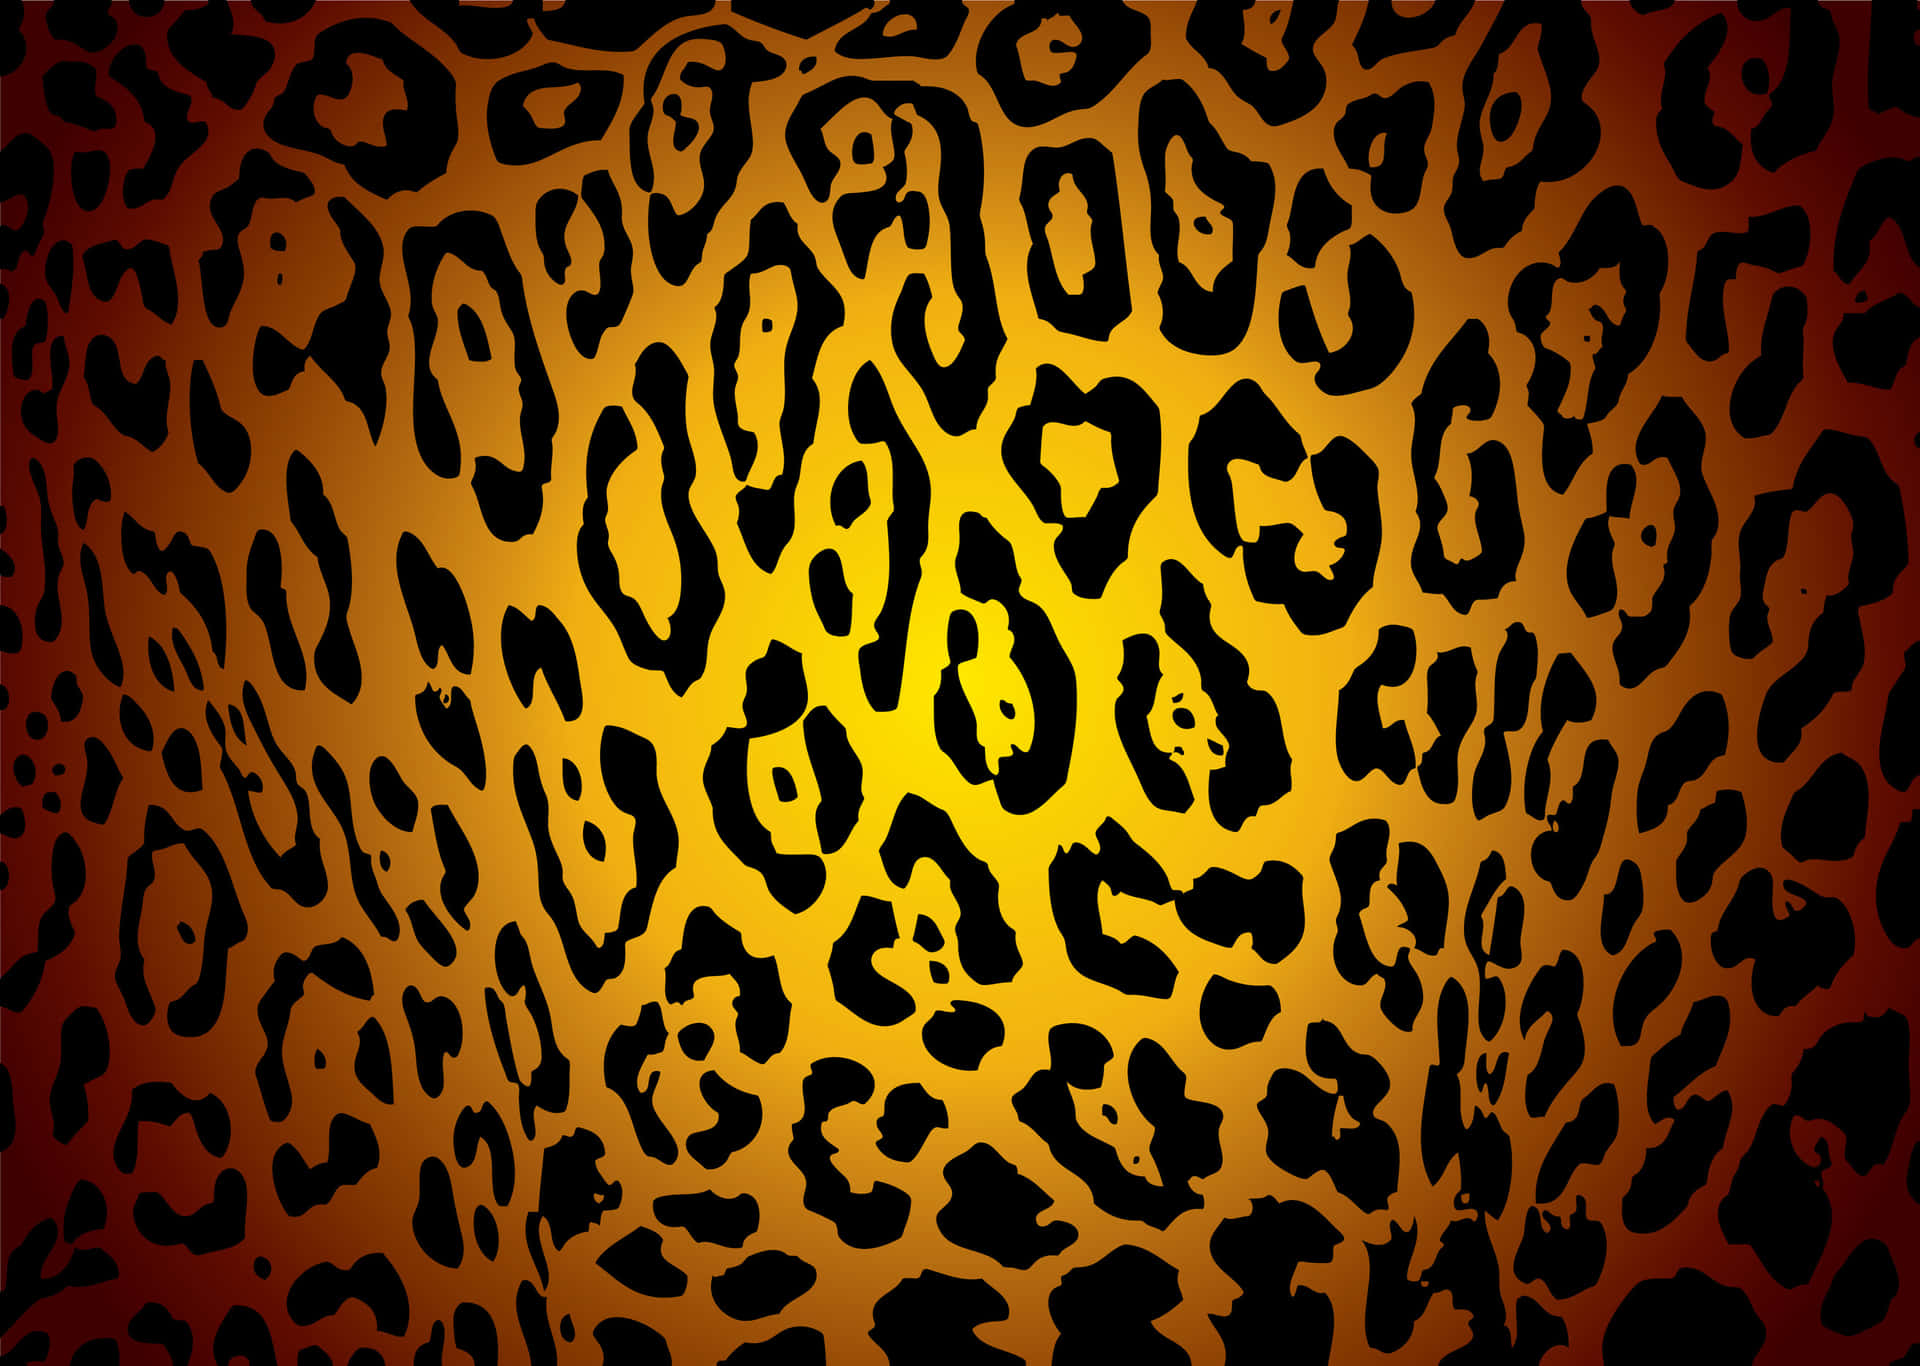 Fur and Animal Print Backgrounds and Wallpapers  Leopard print wallpaper,  Animal print wallpaper, Animal print background